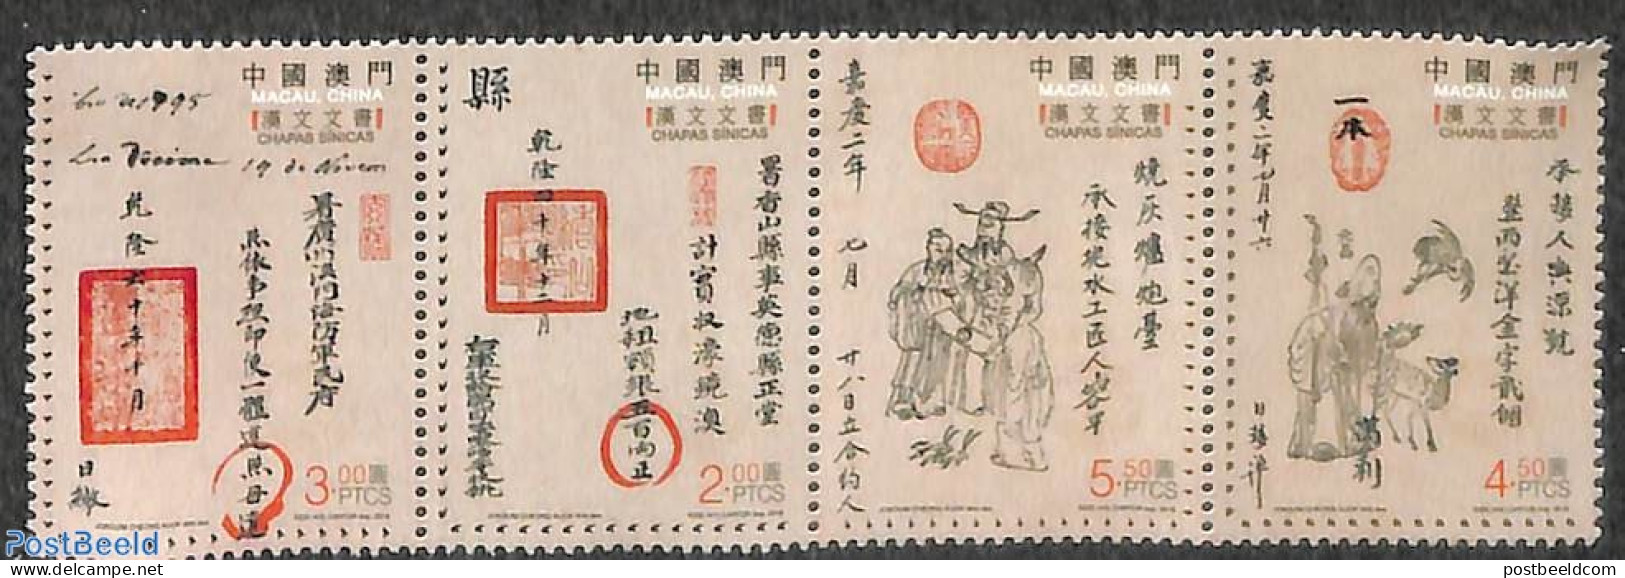 Macao 2018 Chapas Sinicas 4v [:::] Or [+], Mint NH, Art - Handwriting And Autographs - Unused Stamps